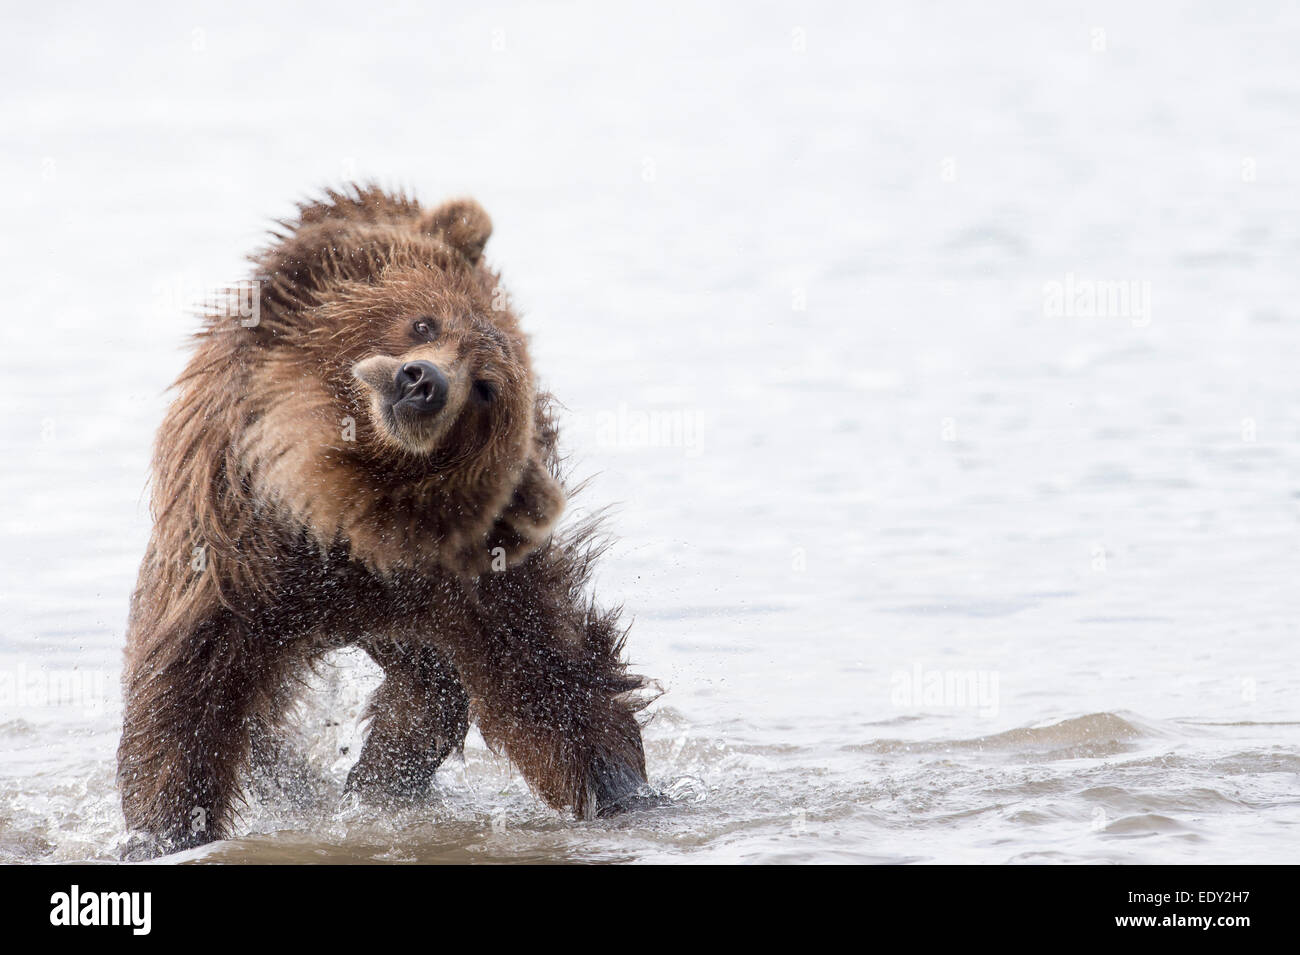 brown bear shakes its fur dry, while fishing for salmon Stock Photo